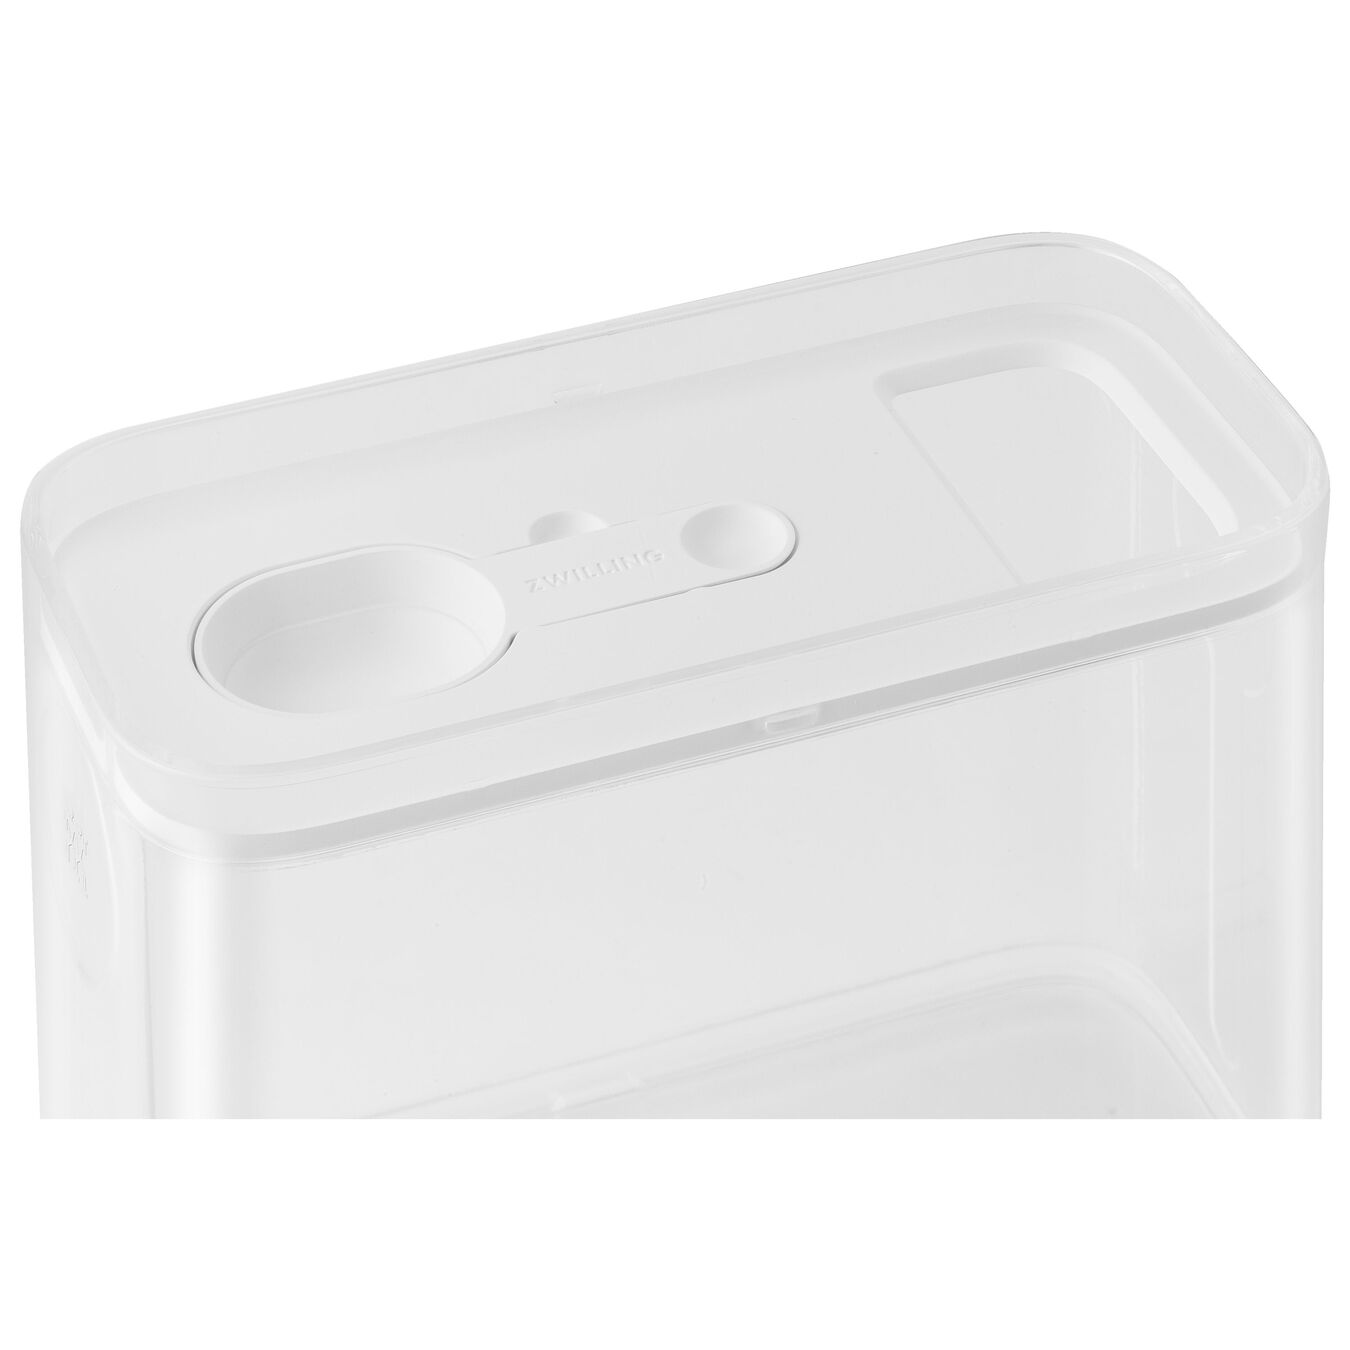 Mepal Modula Stackable Food Storage Containers Starter Set - White